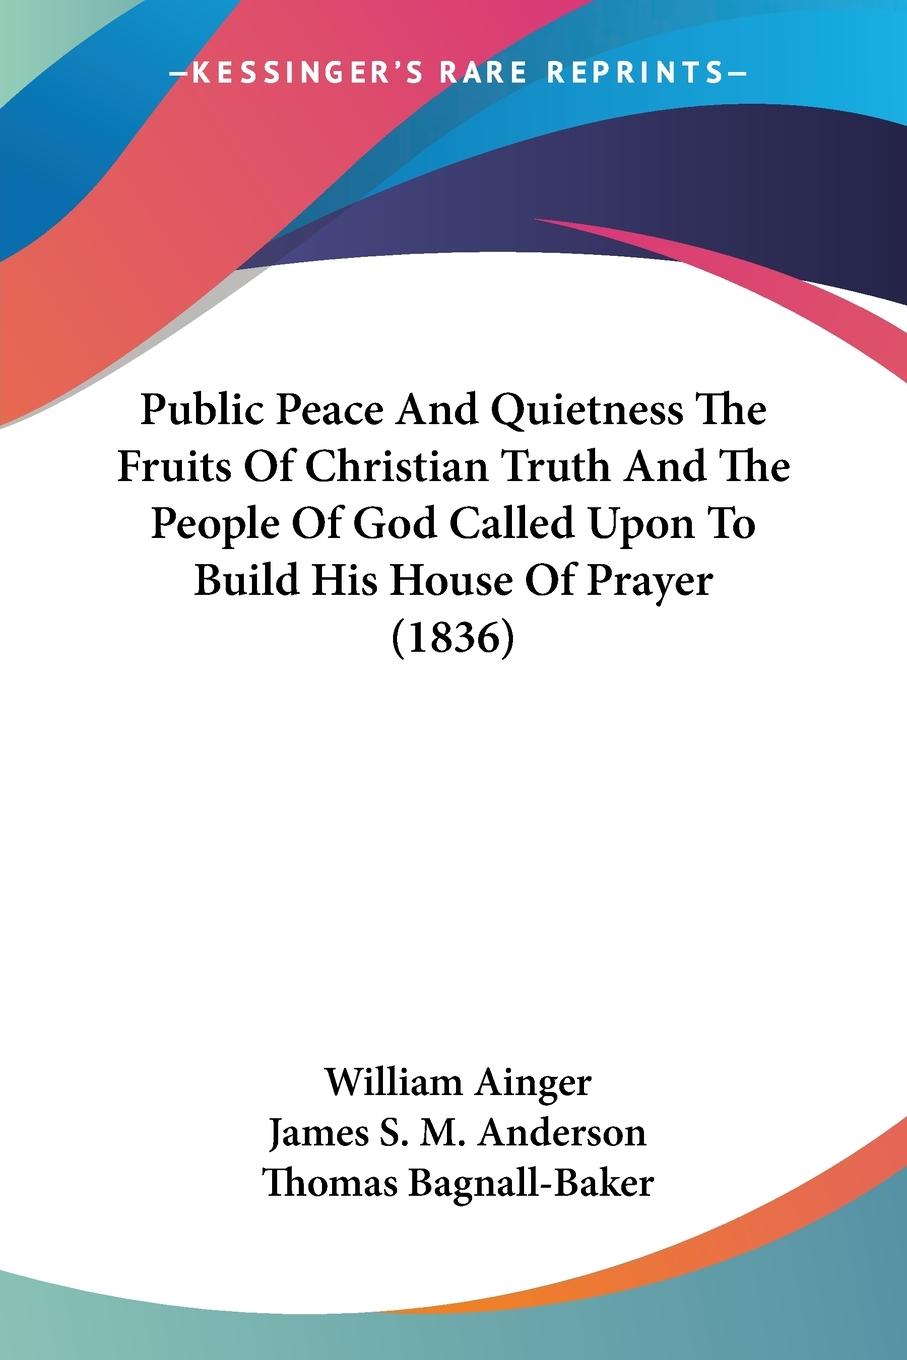 Public Peace And Quietness The Fruits Of Christian Truth And The People Of God Called Upon To Build His House Of Prayer (1836) - Ainger, William Anderson, James S. M. Bagnall-Baker, Thomas